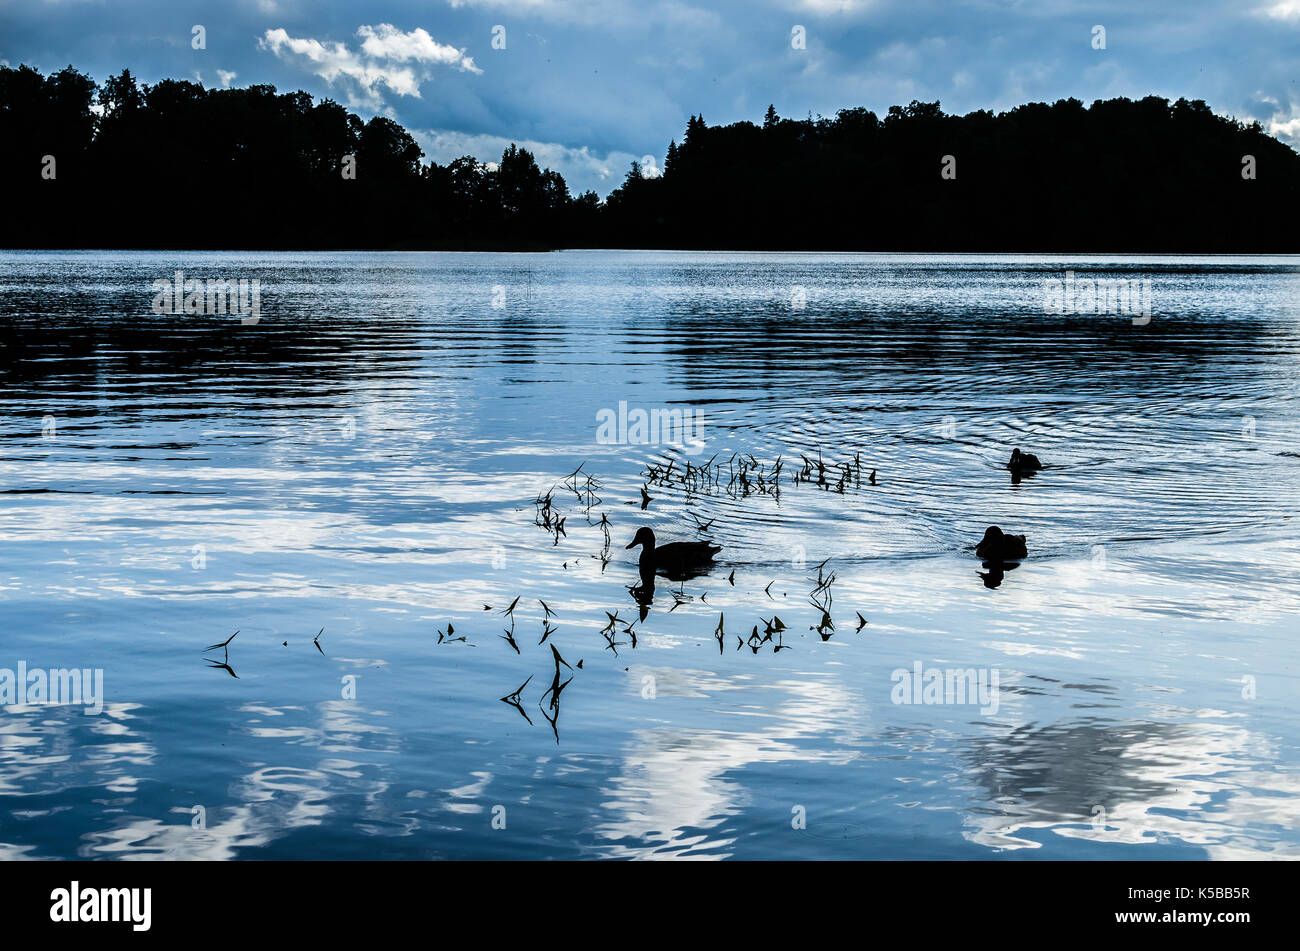 Silhouette of ducks swimming in a placid lake Stock Photo